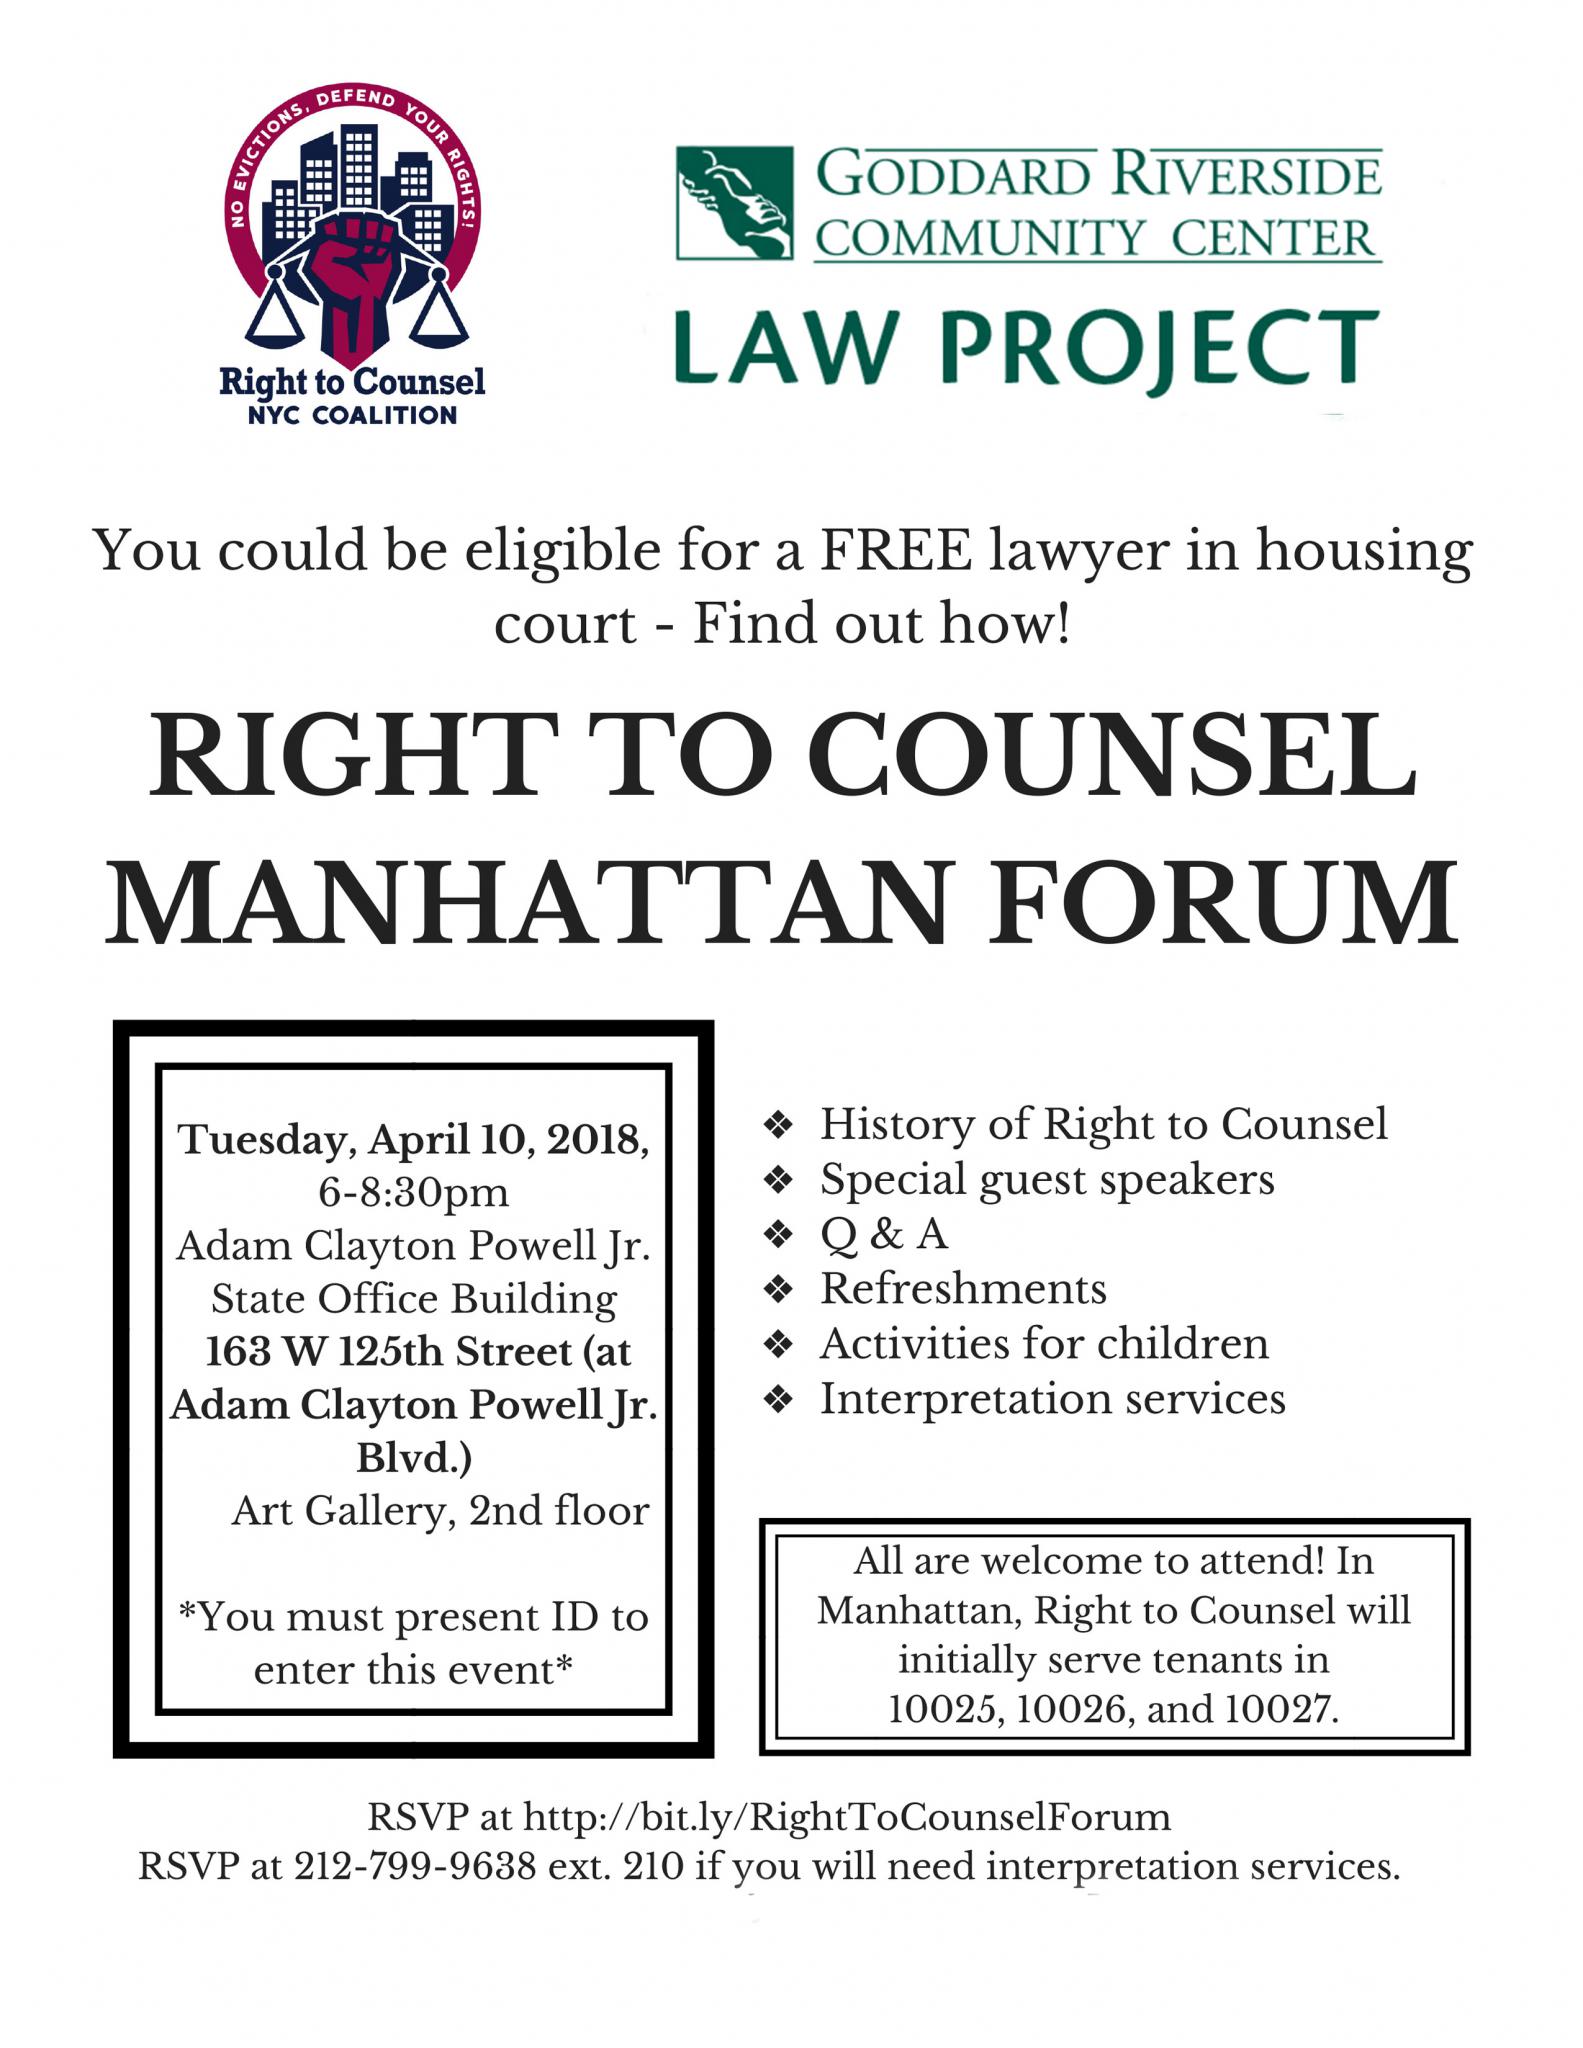 Learn About Your Right to Free Counsel in Housing Court | Goddard Riverside